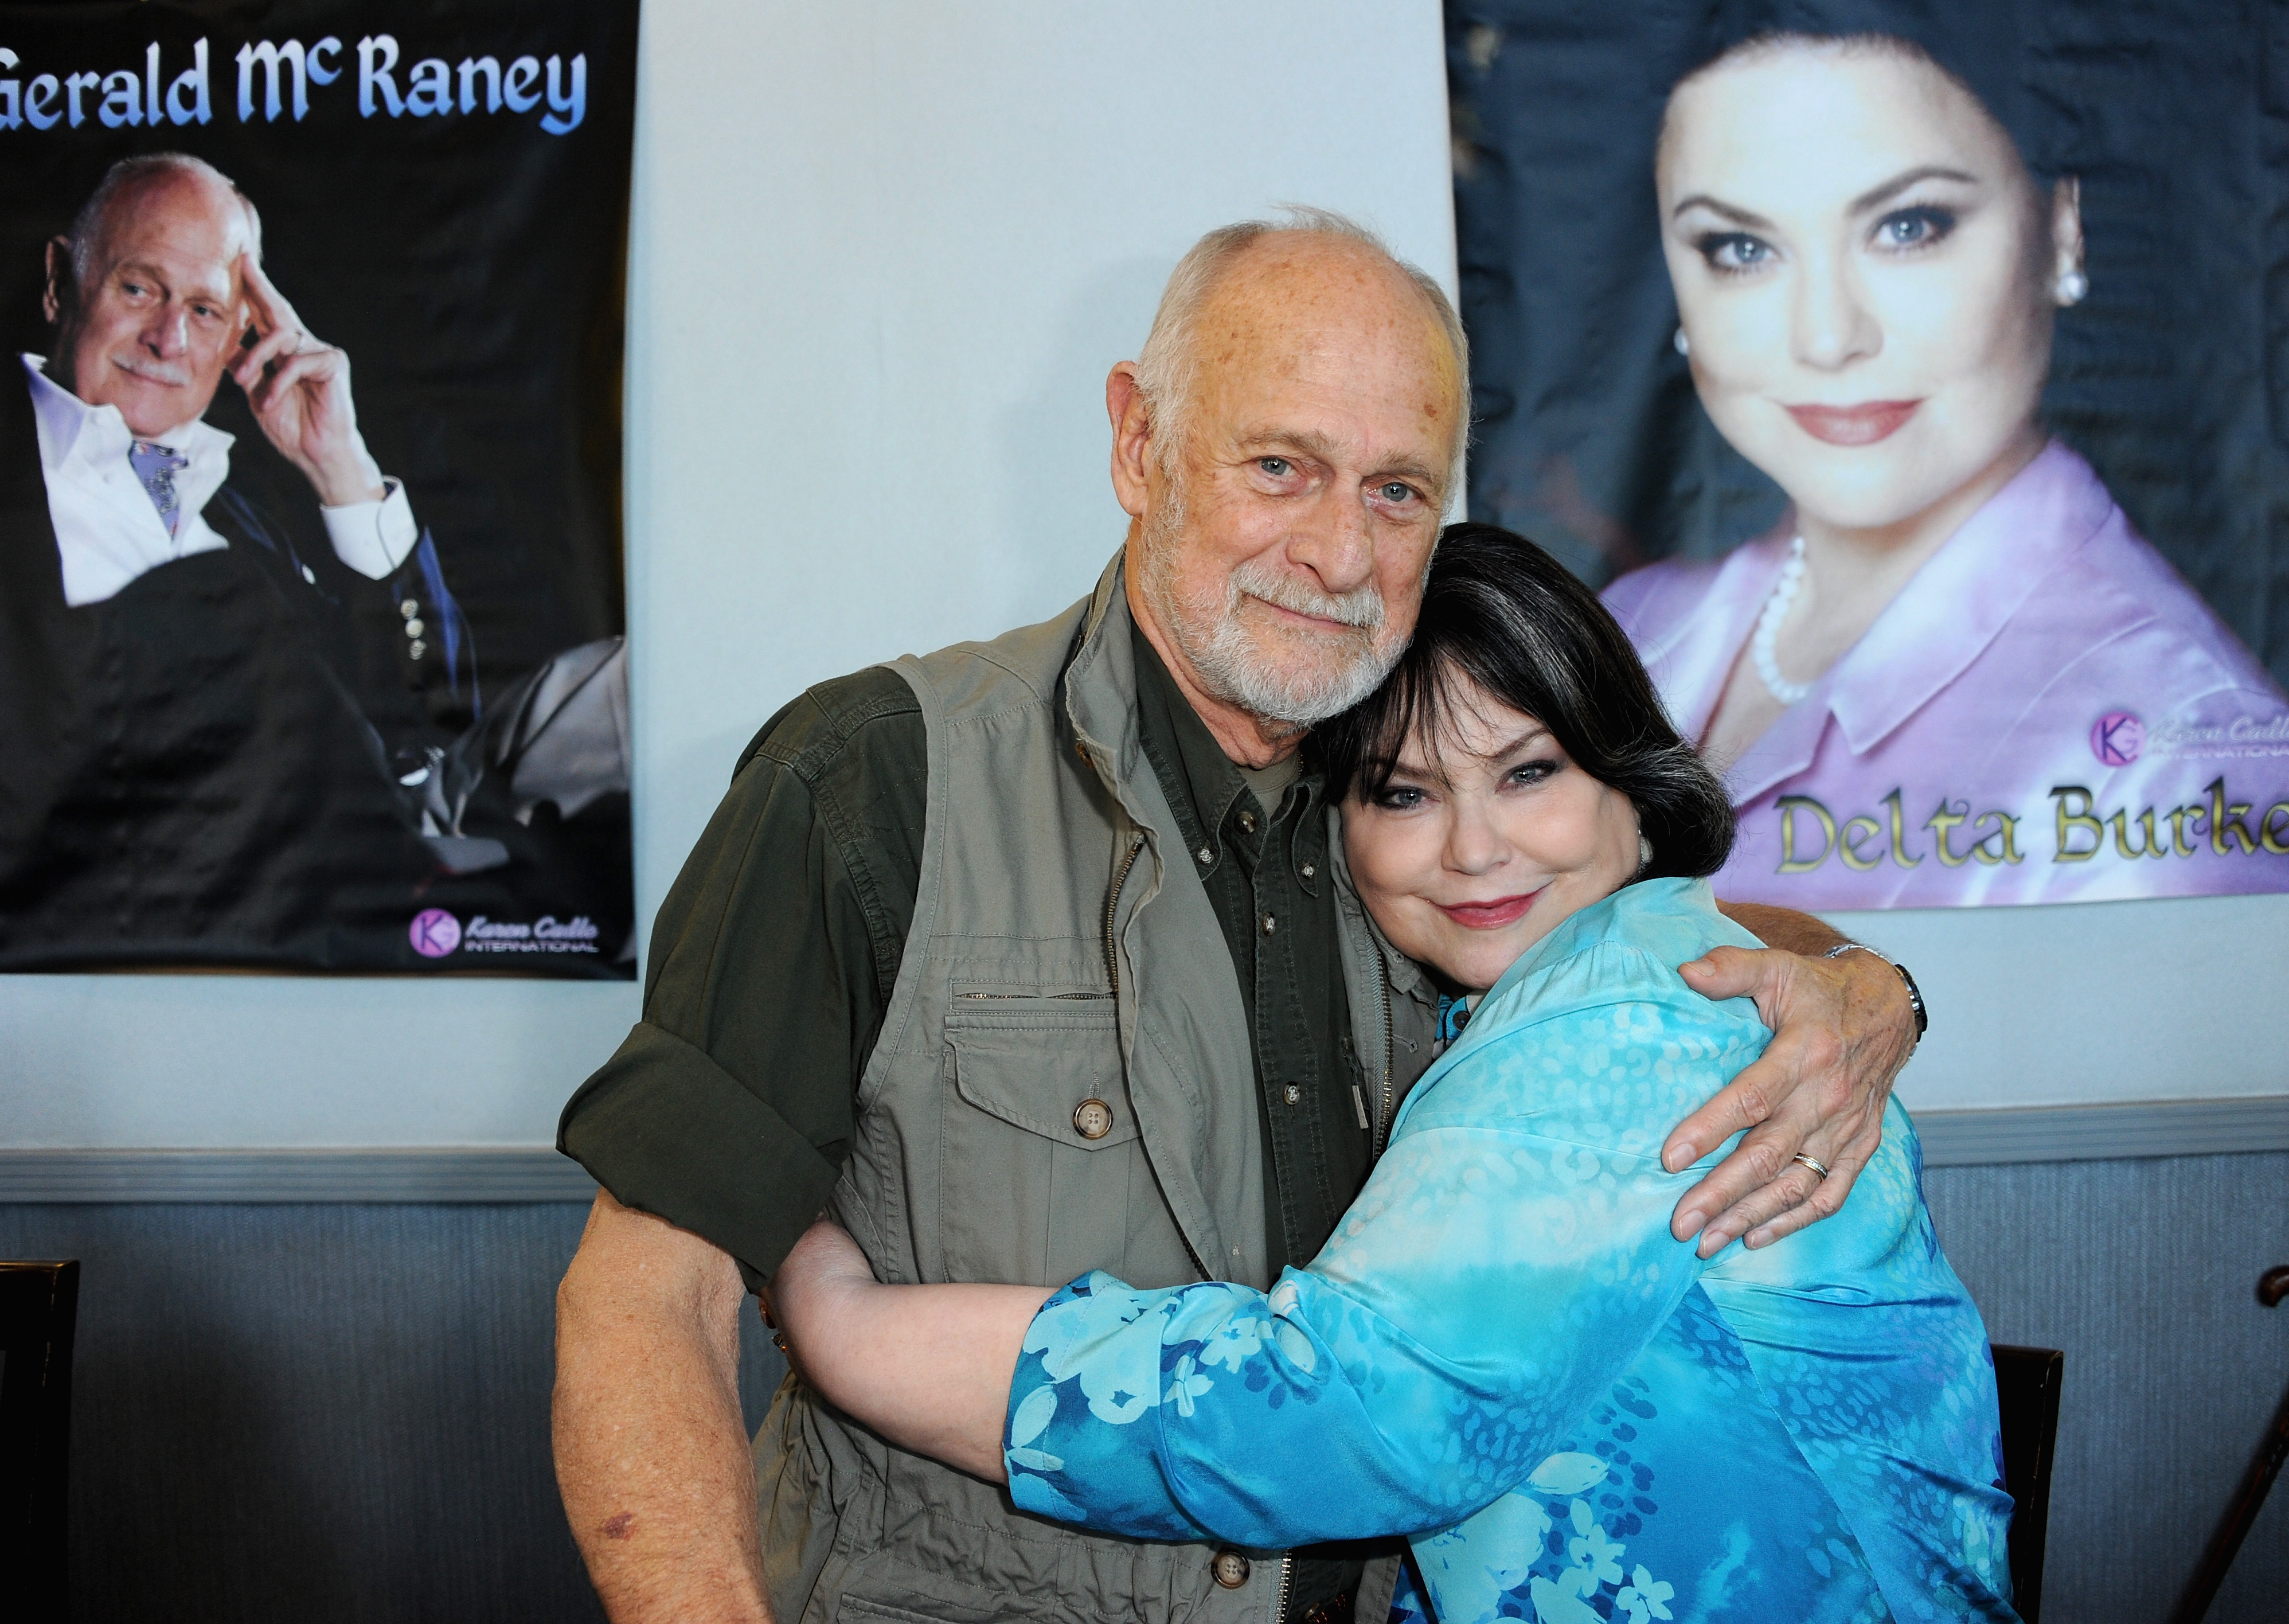 Gerald McRaney and Delta Burke at the 2020 Hollywood Show on February 1, 2020, in Burbank, California | Source: Getty Images